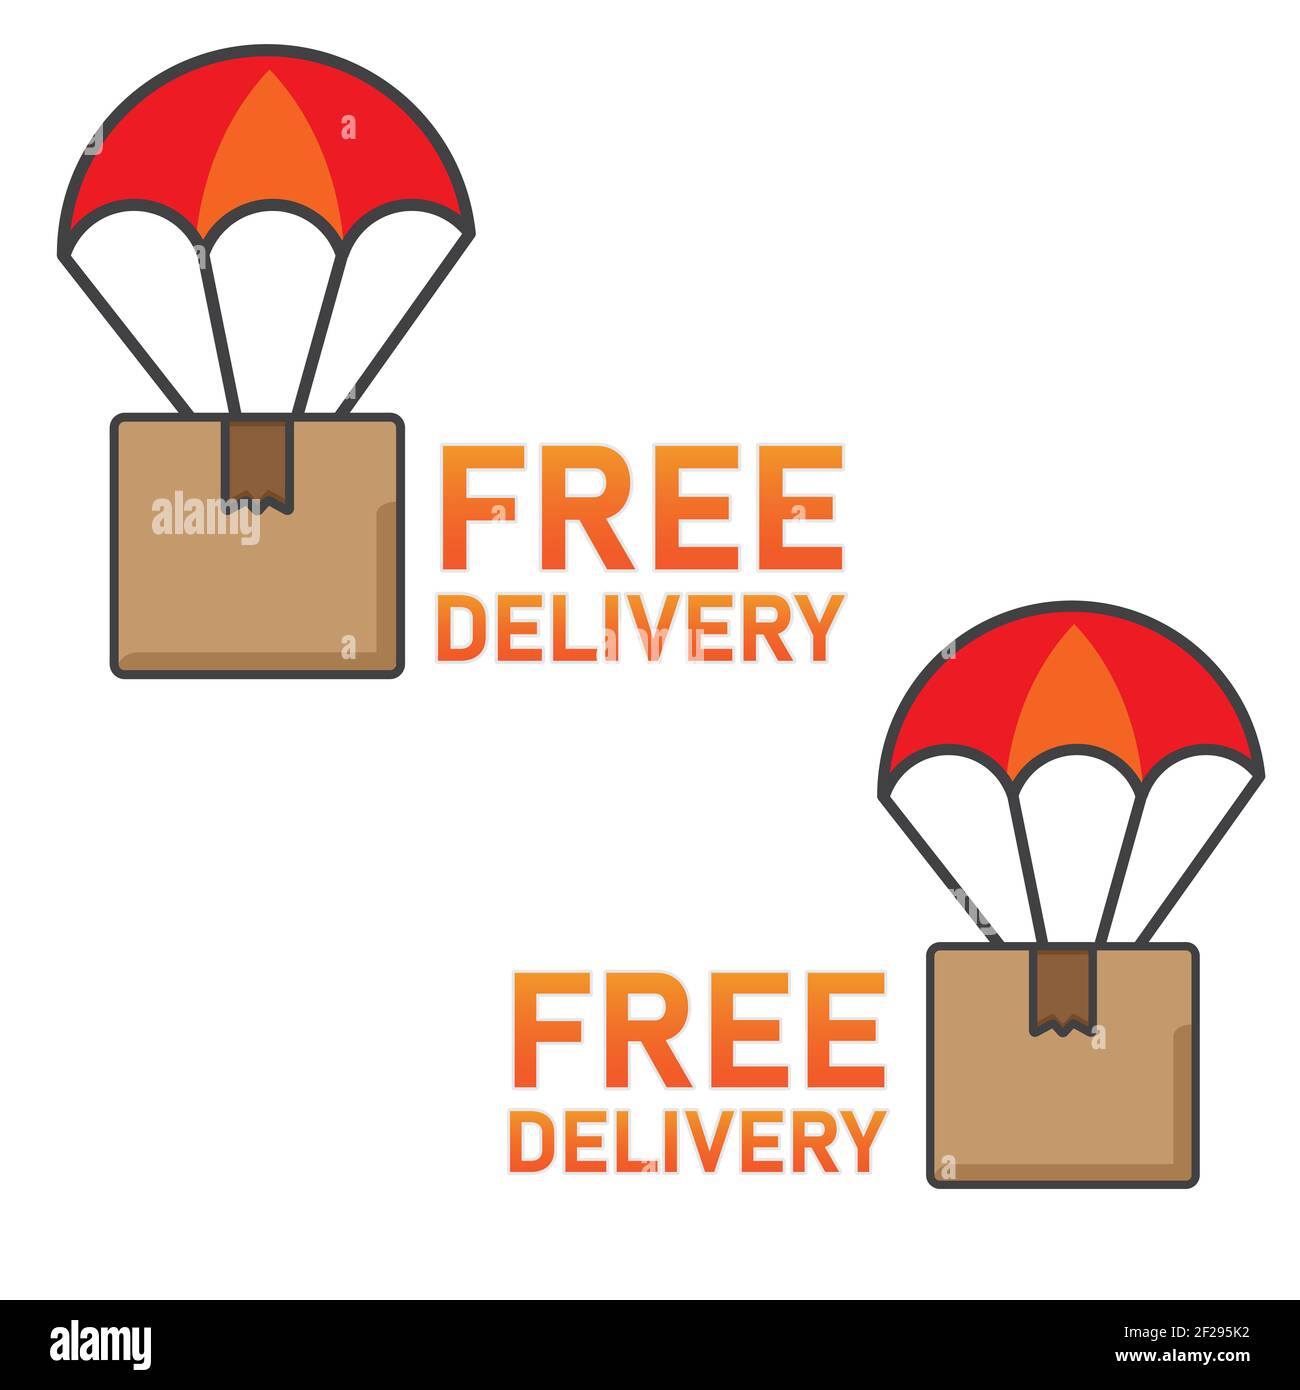 free delivery illustration. package delivery illustration. Flat vector icon concept Stock Photo